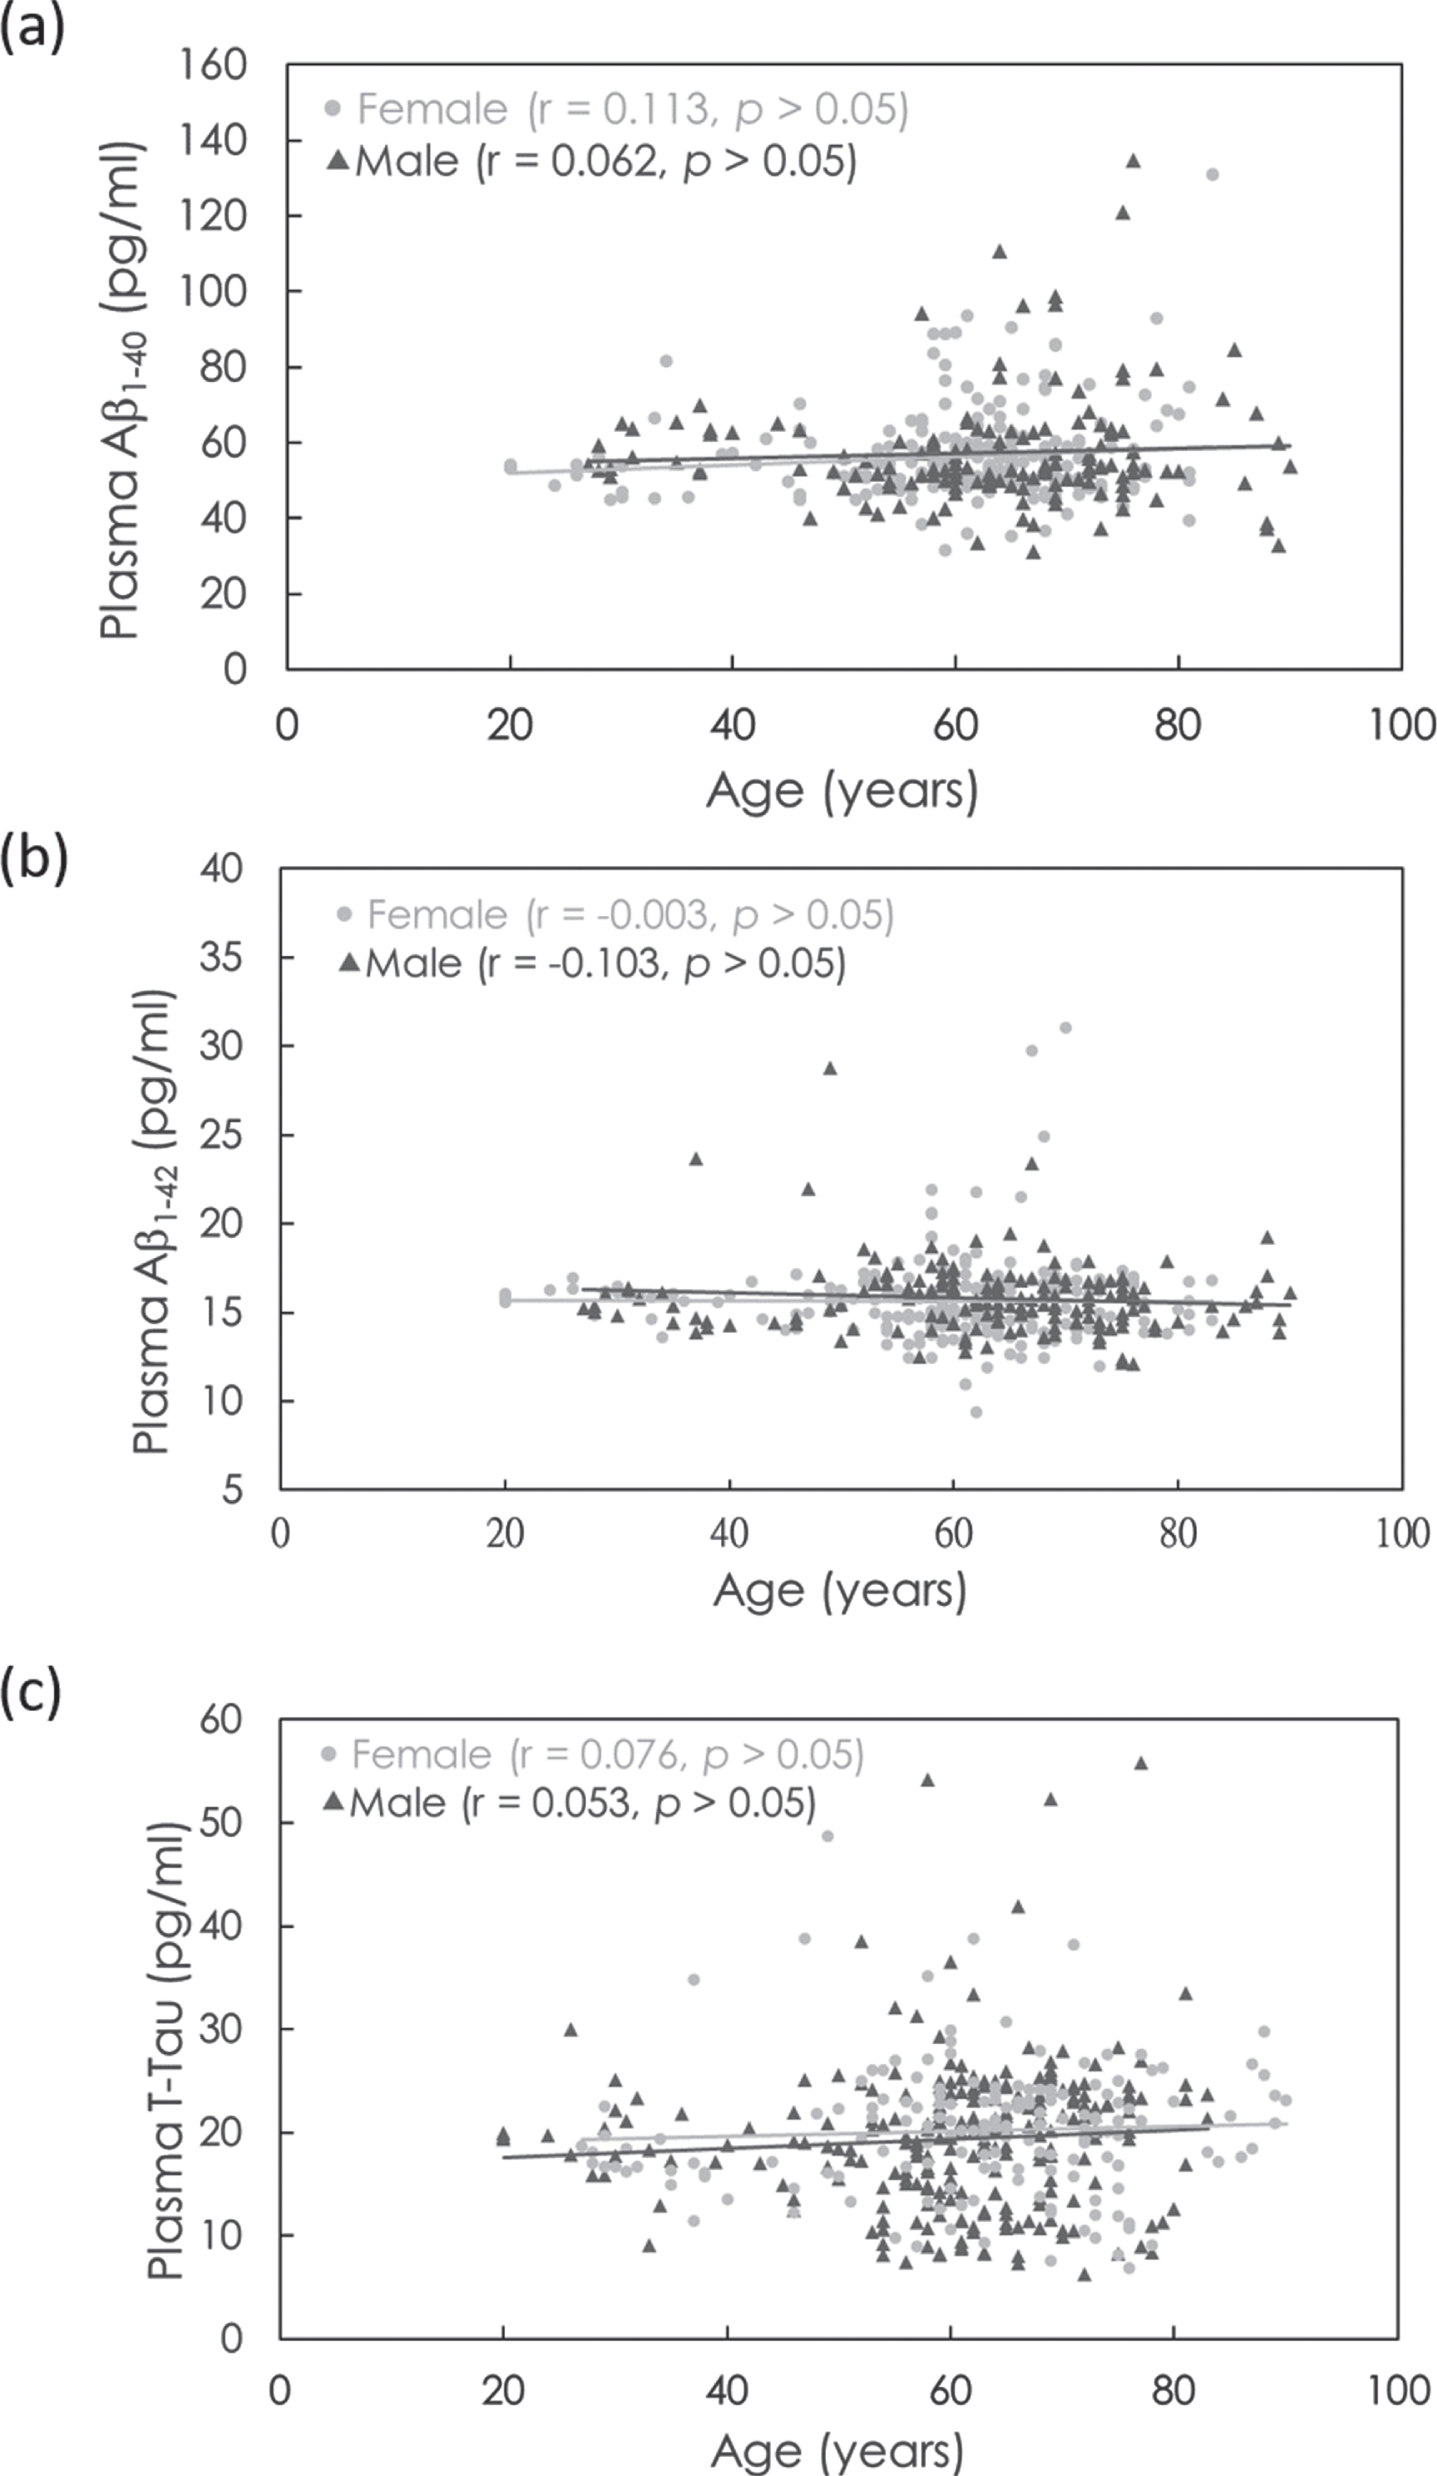 Age-dependent concentrations of plasma (a) Aβ1-40, (b) Aβ1-42, and (c) T-Tau in females (gray dots) and males (dark gray dots).